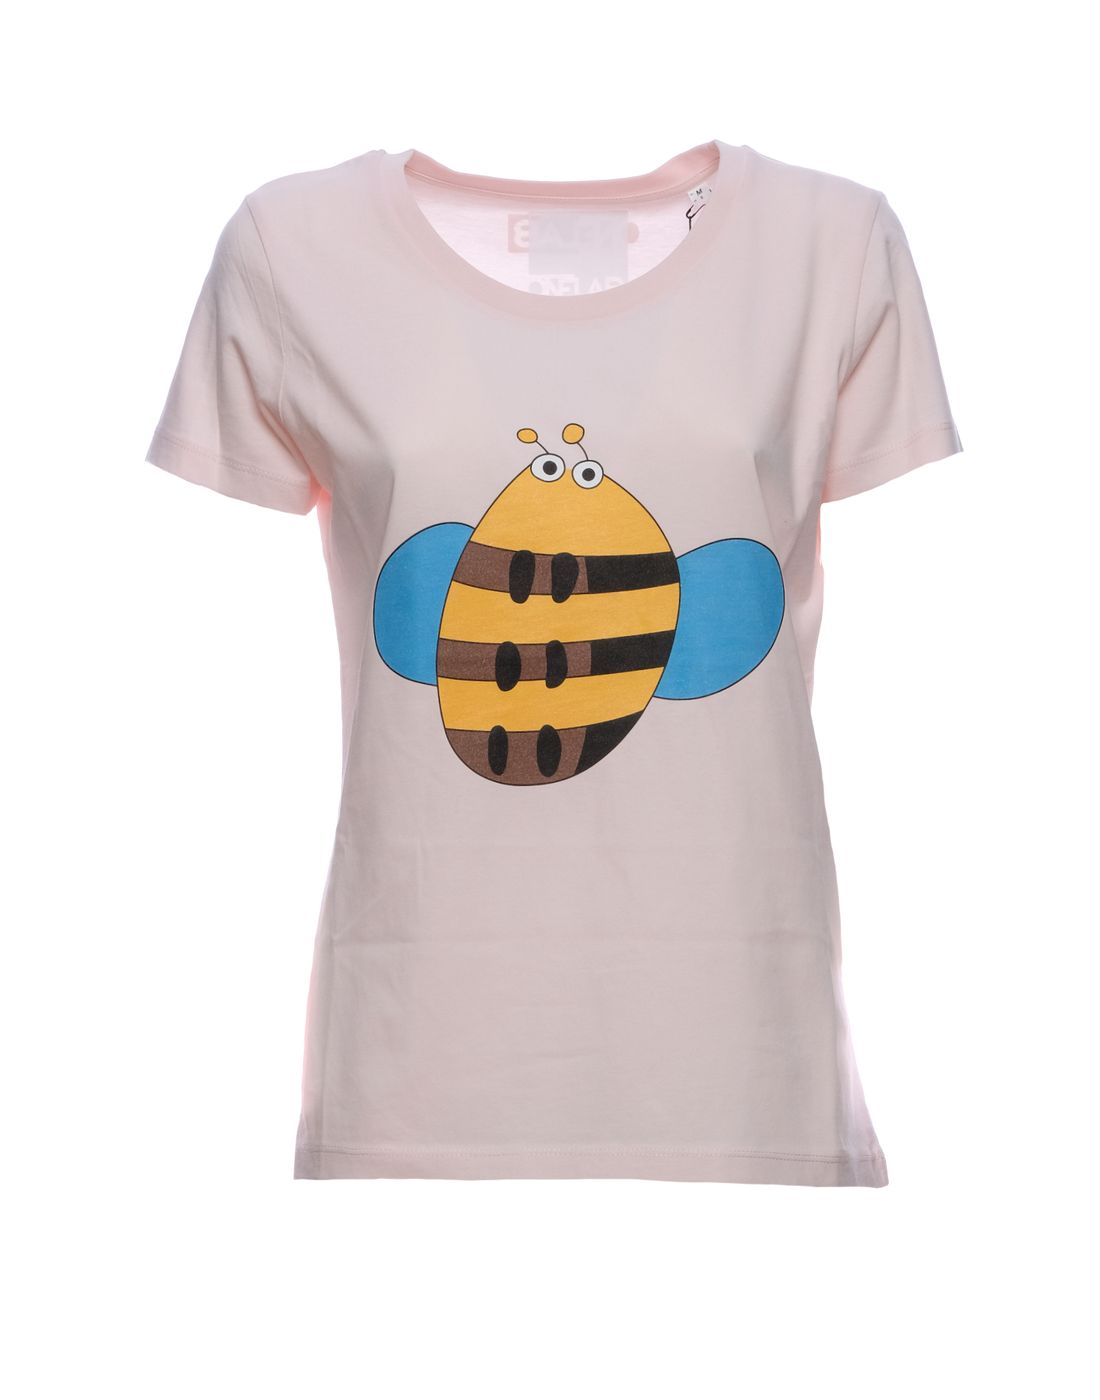 T-shirt for woman ONELAB Busy bee 005 pink